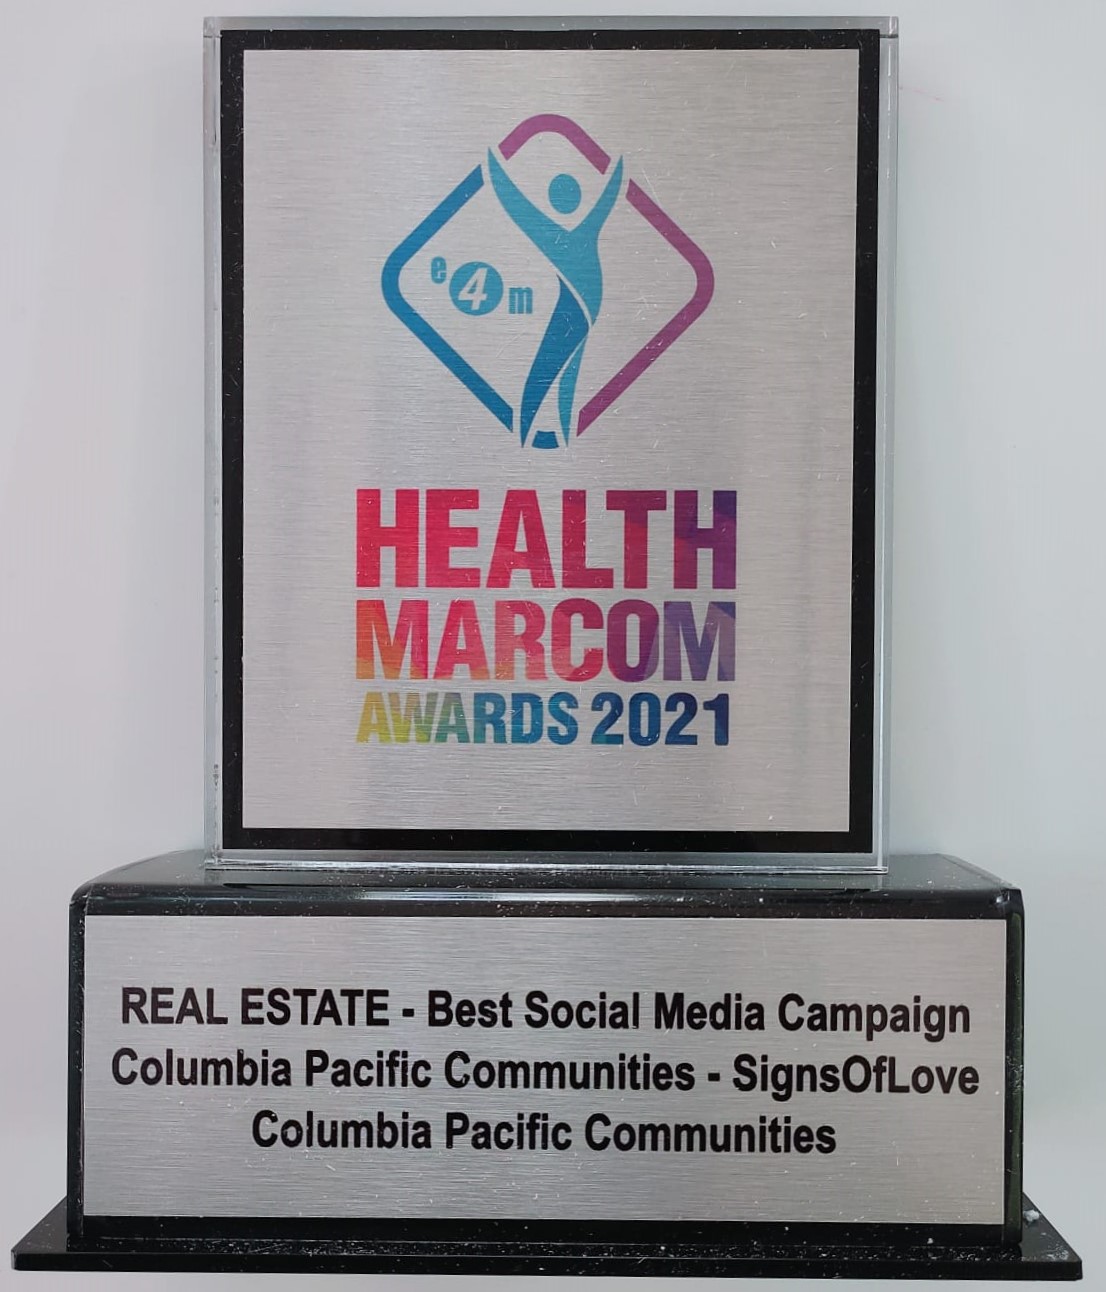 Health Marcom Awards 2021 for the best social media campaign - Columbia Pacific